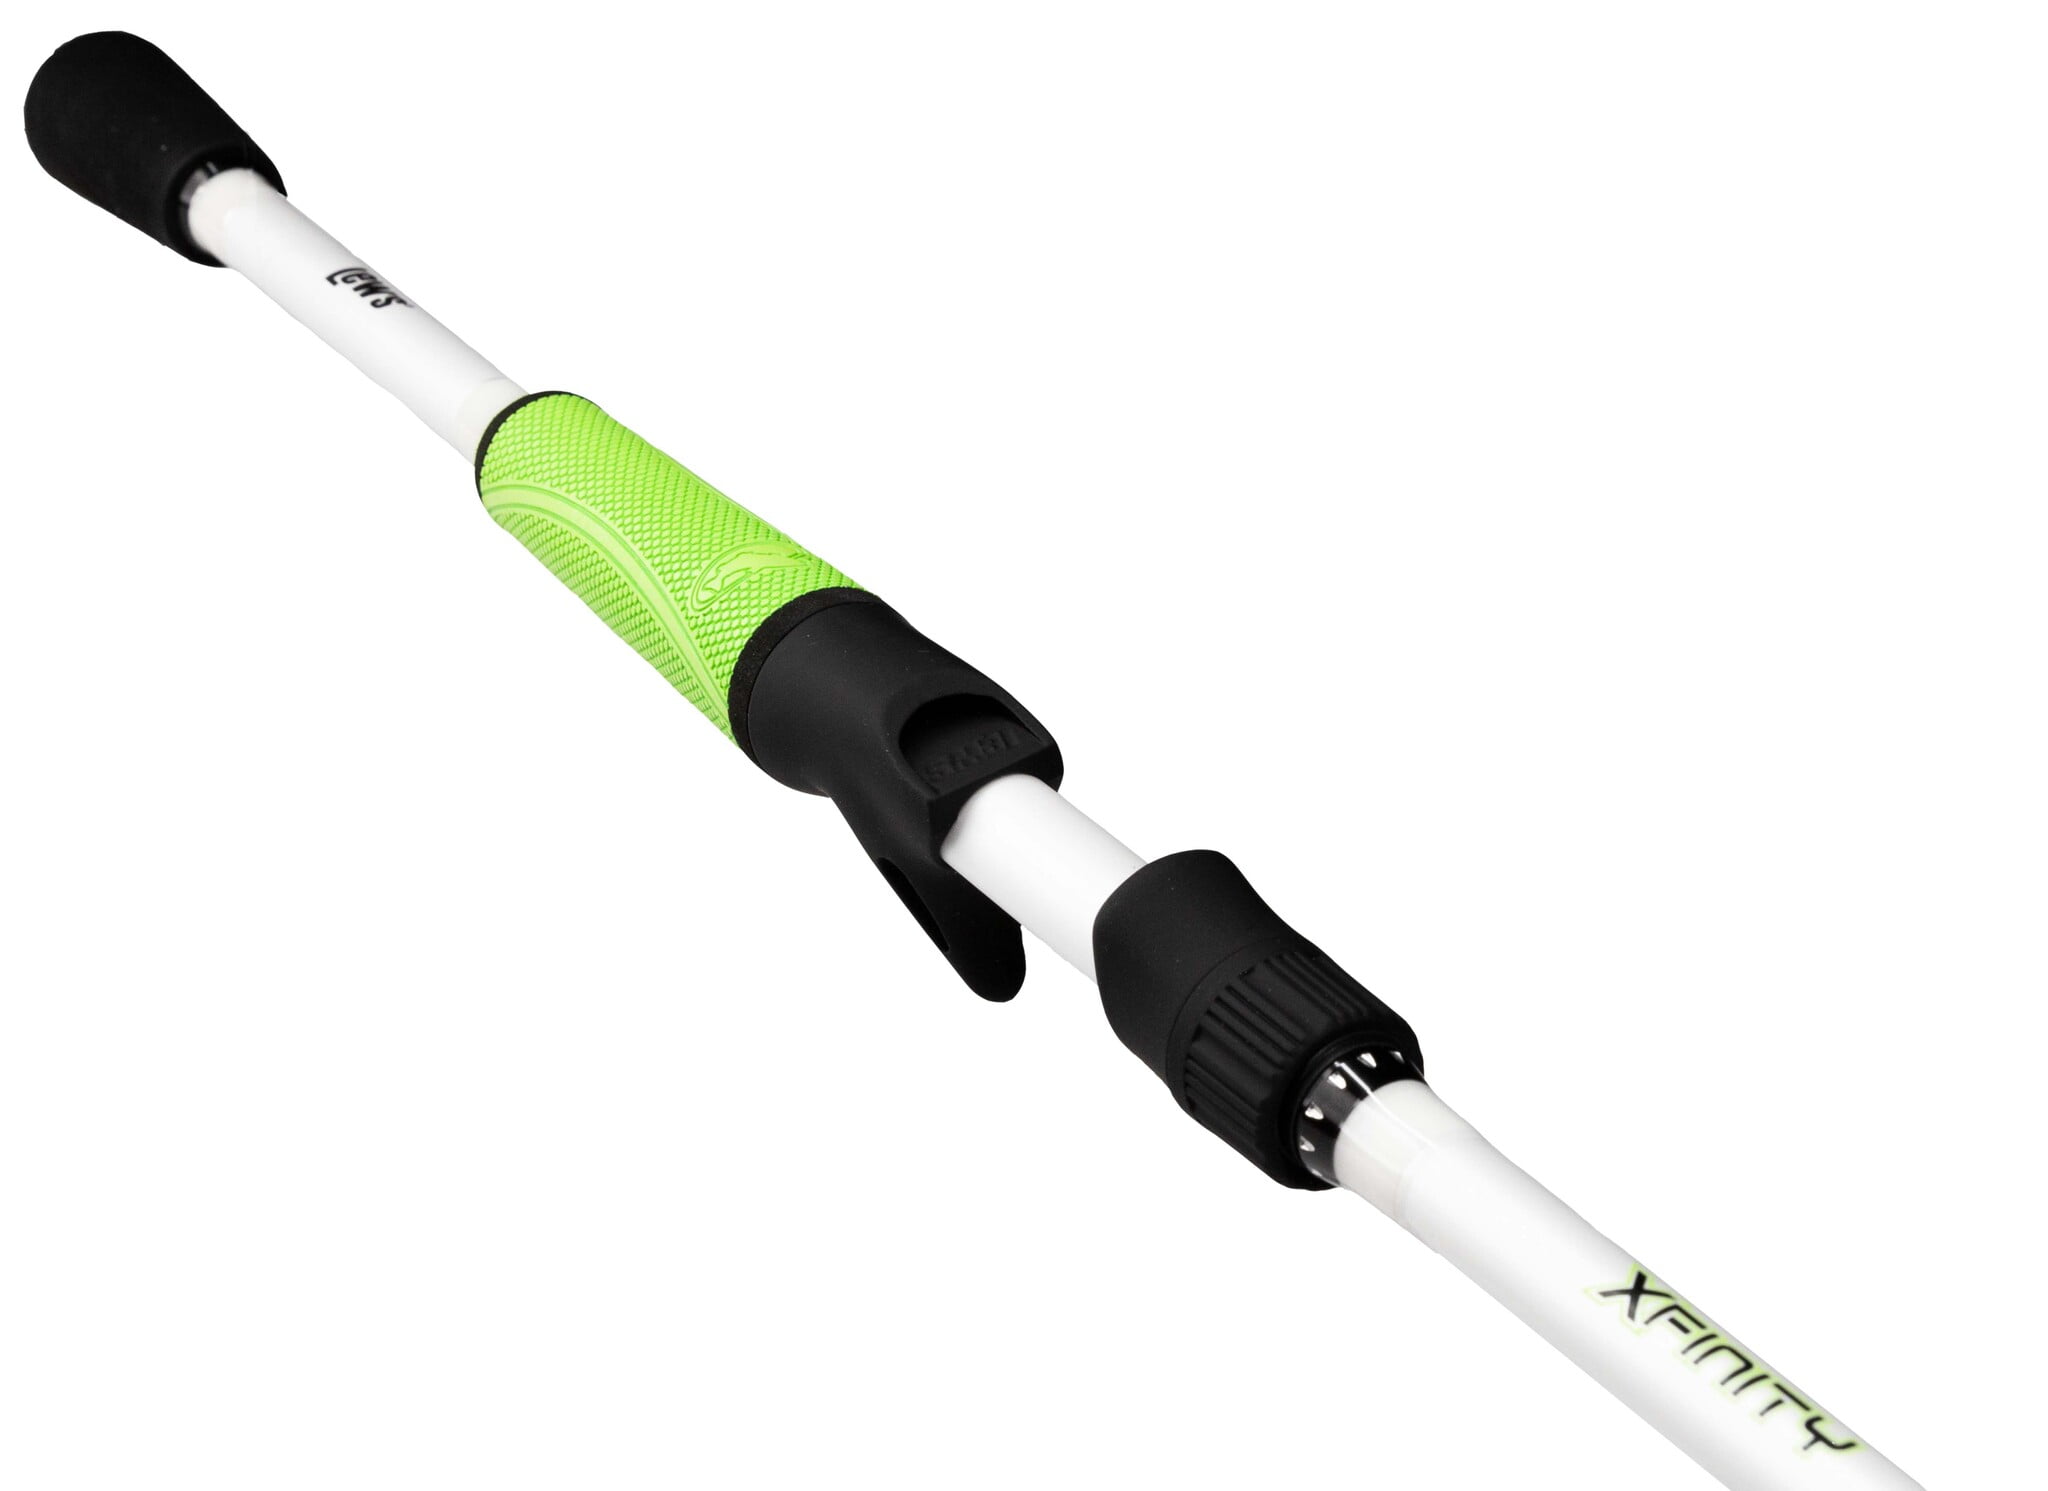 Lew's Xfinity 6 Ft. 10 In. 1 Piece Medium Action Spinning Fishing Rod 